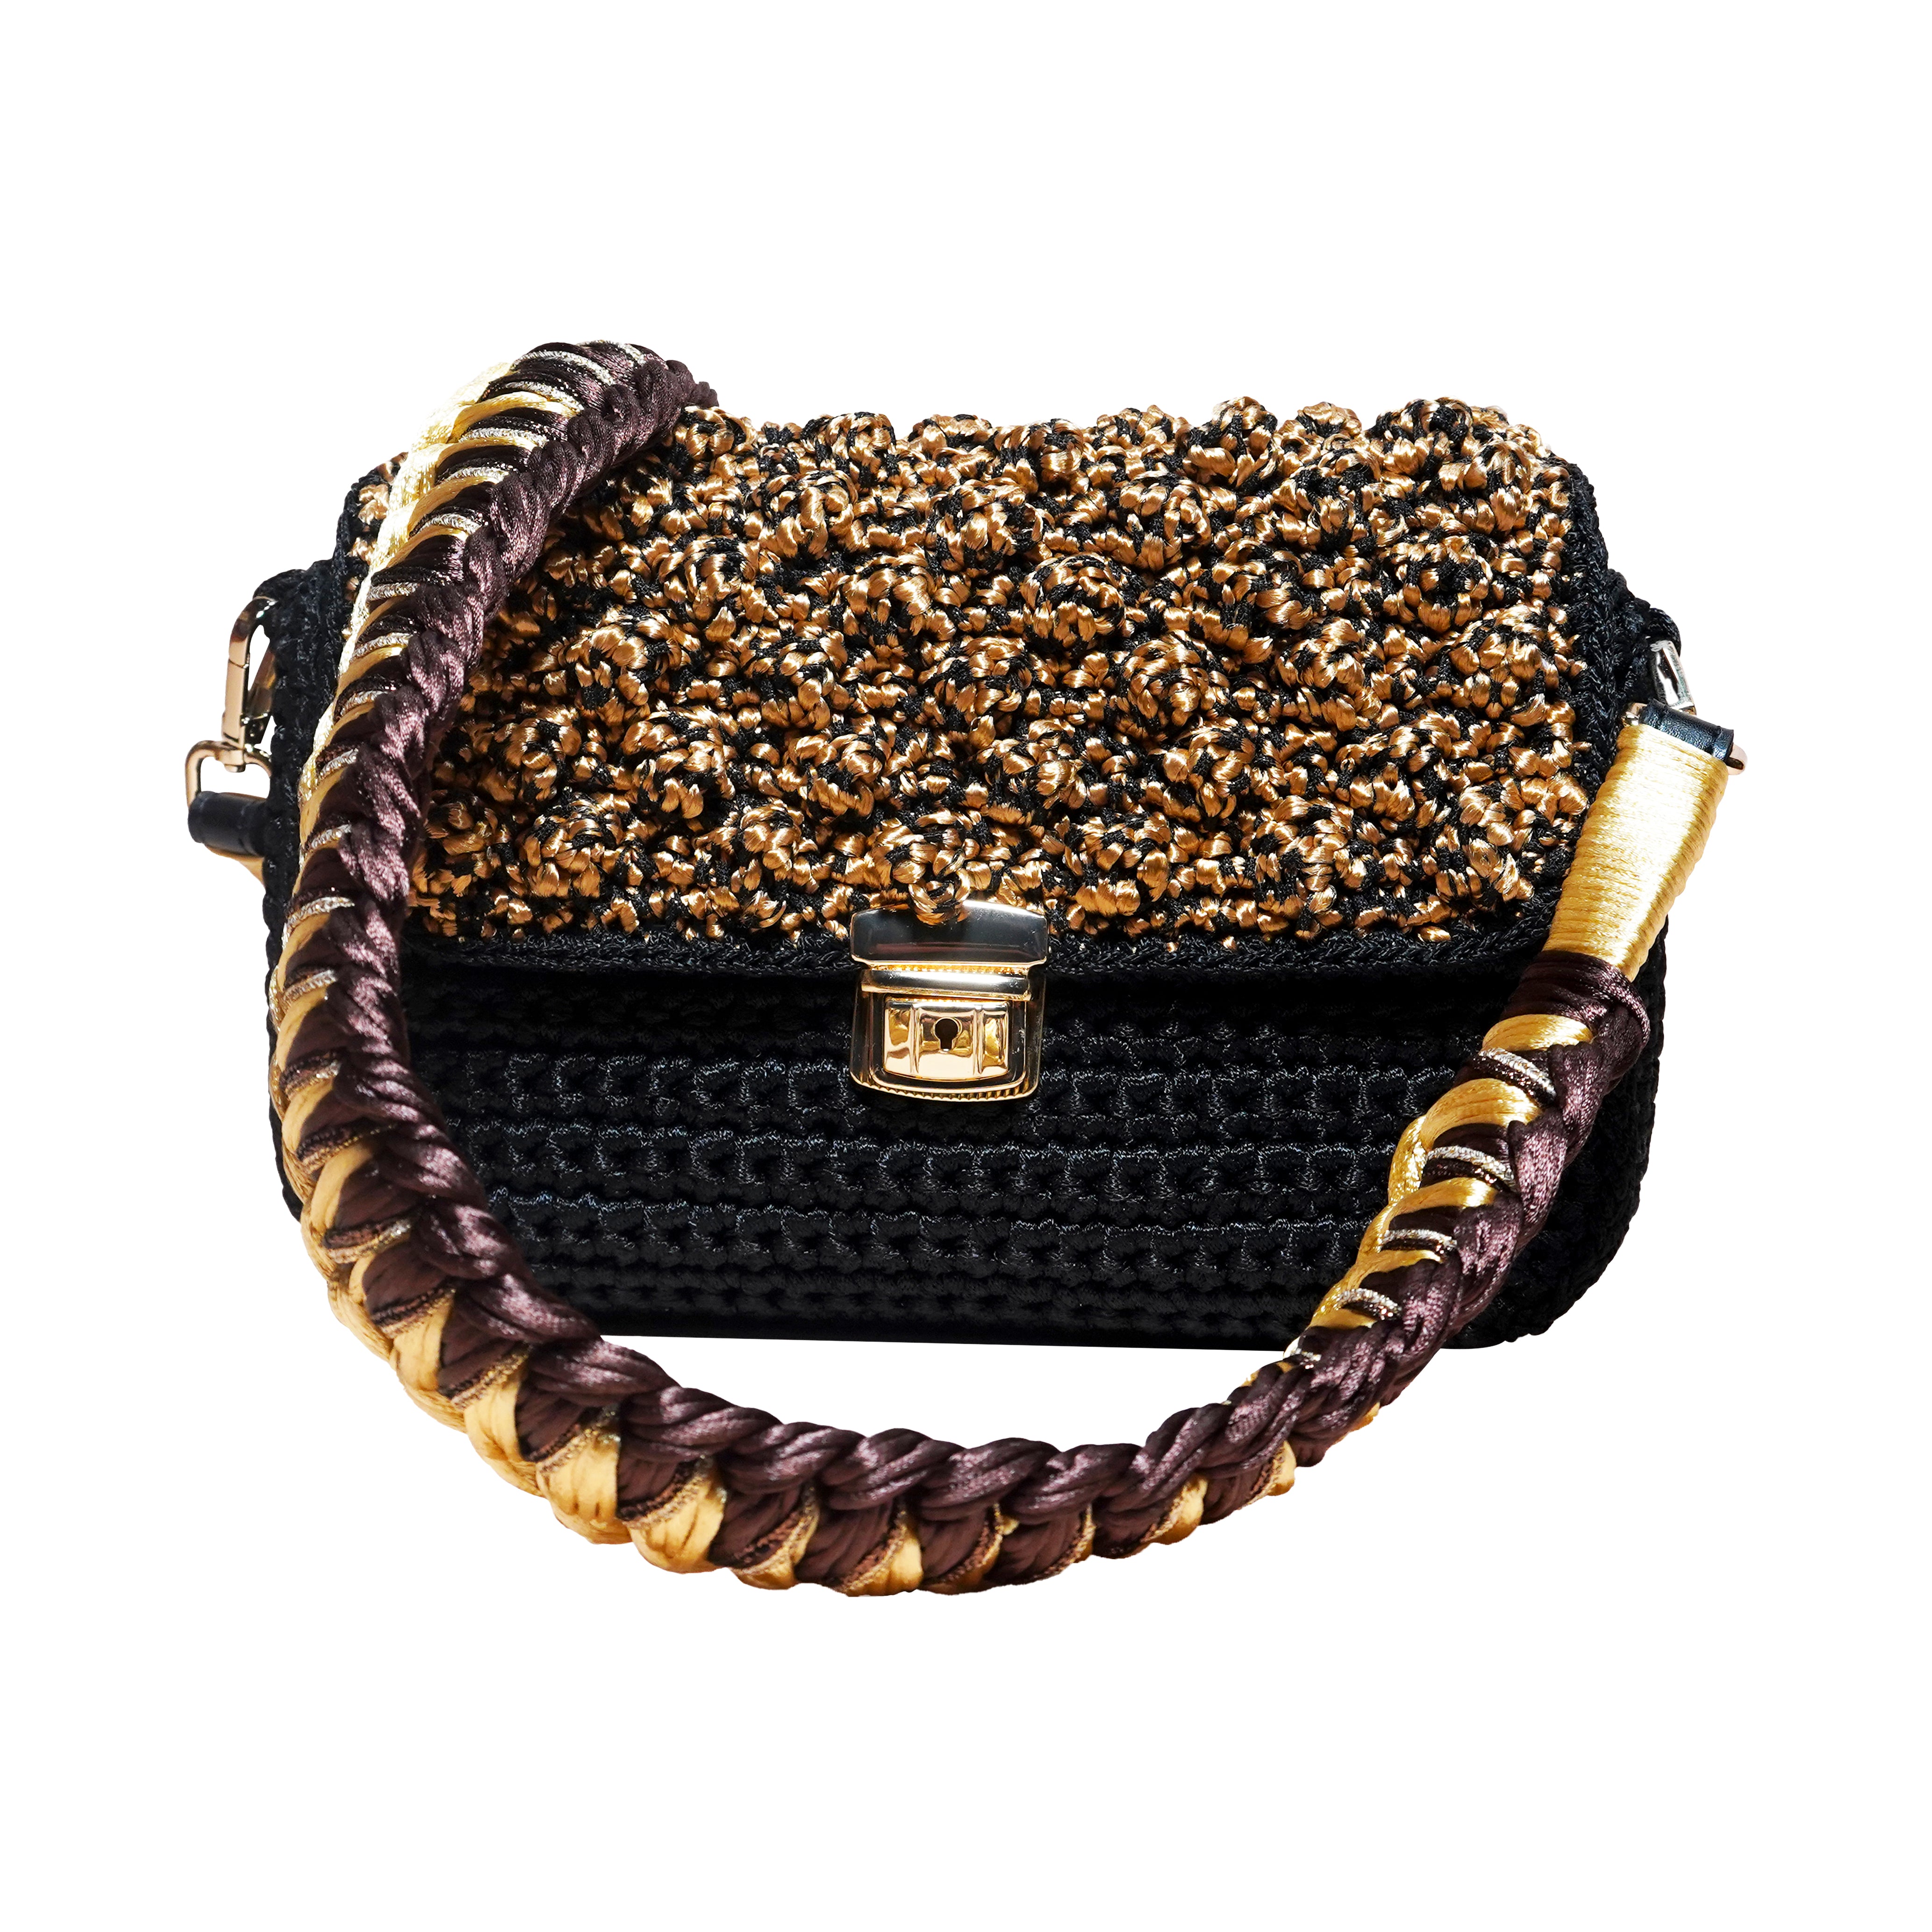 handmade black knitted bag with a golden handmade strap